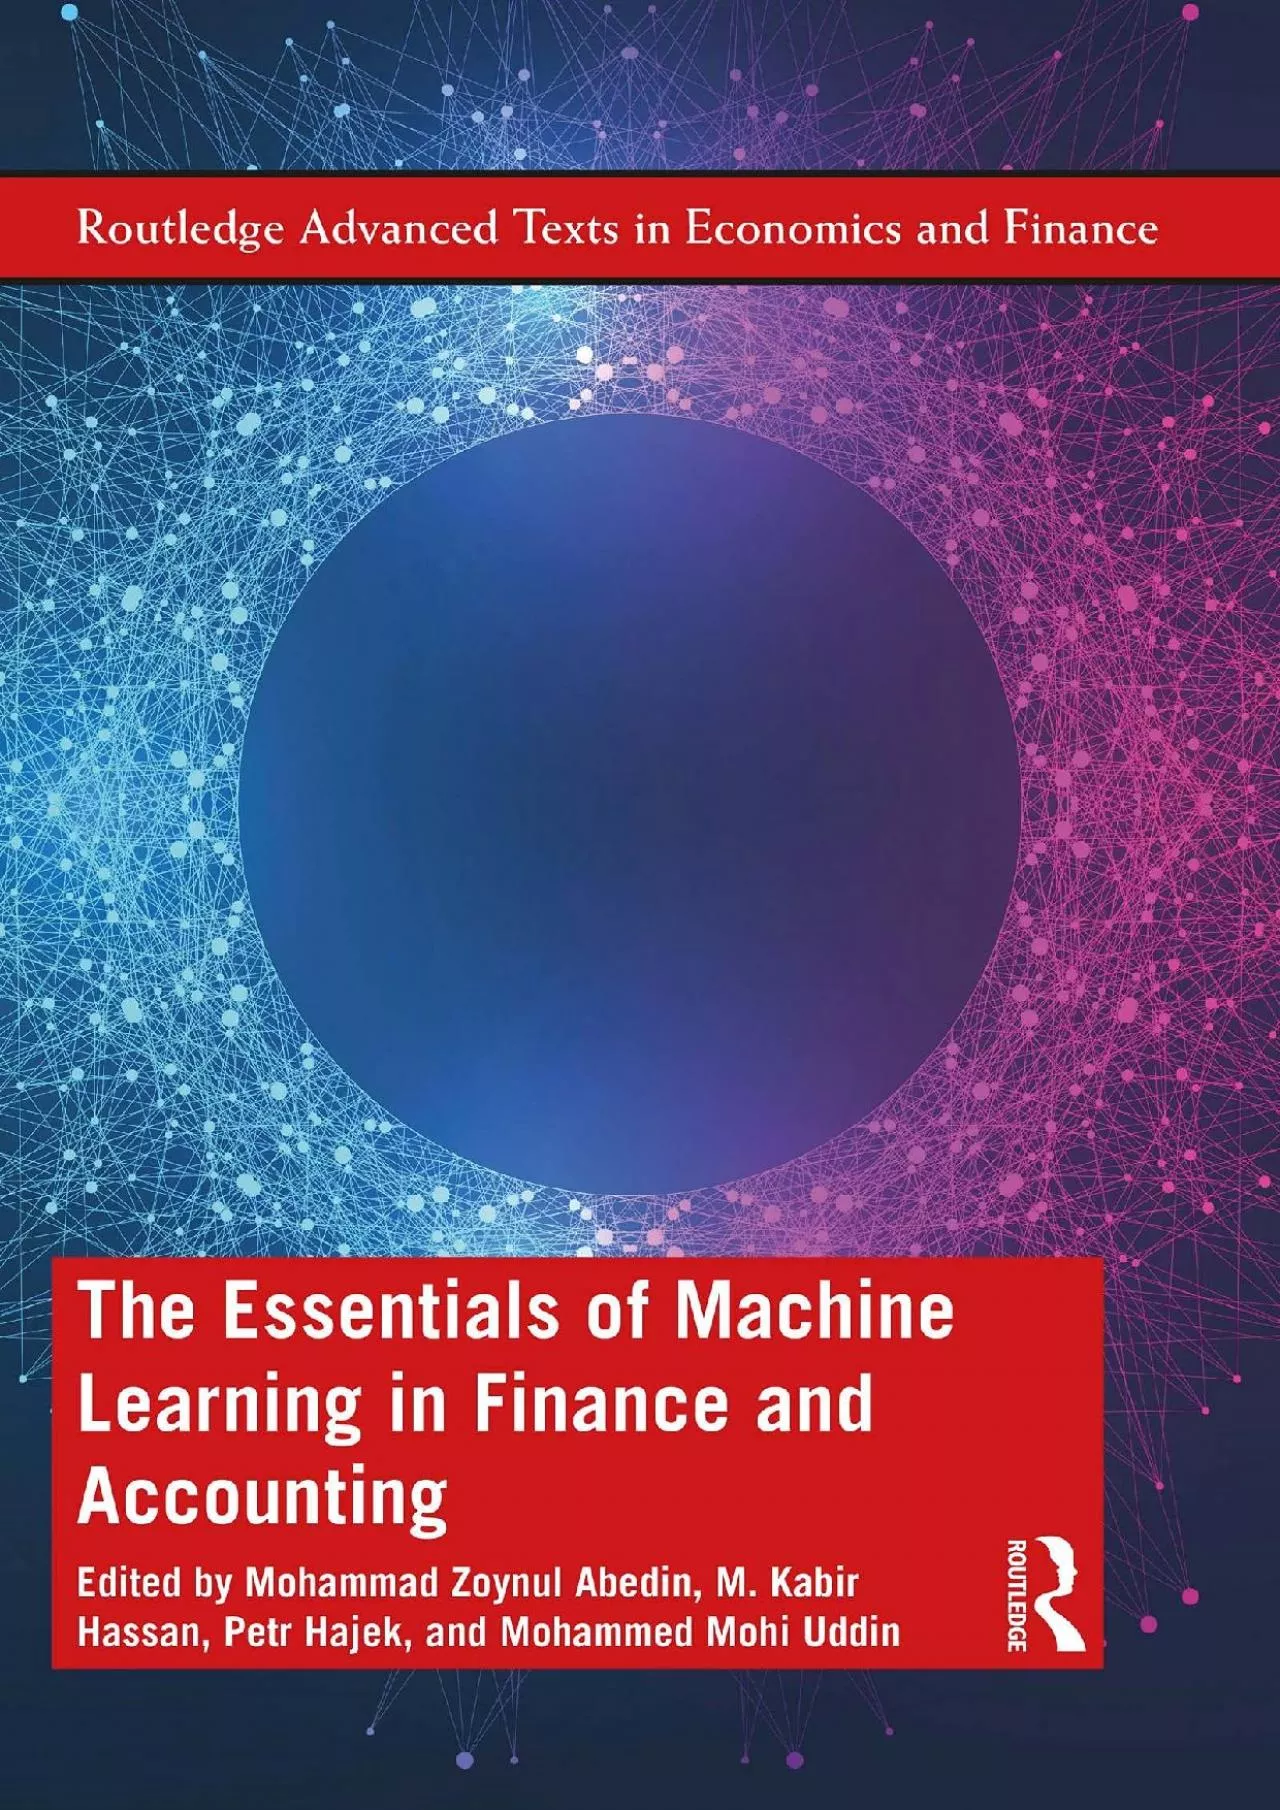 (EBOOK)-The Essentials of Machine Learning in Finance and Accounting (Routledge Advanced